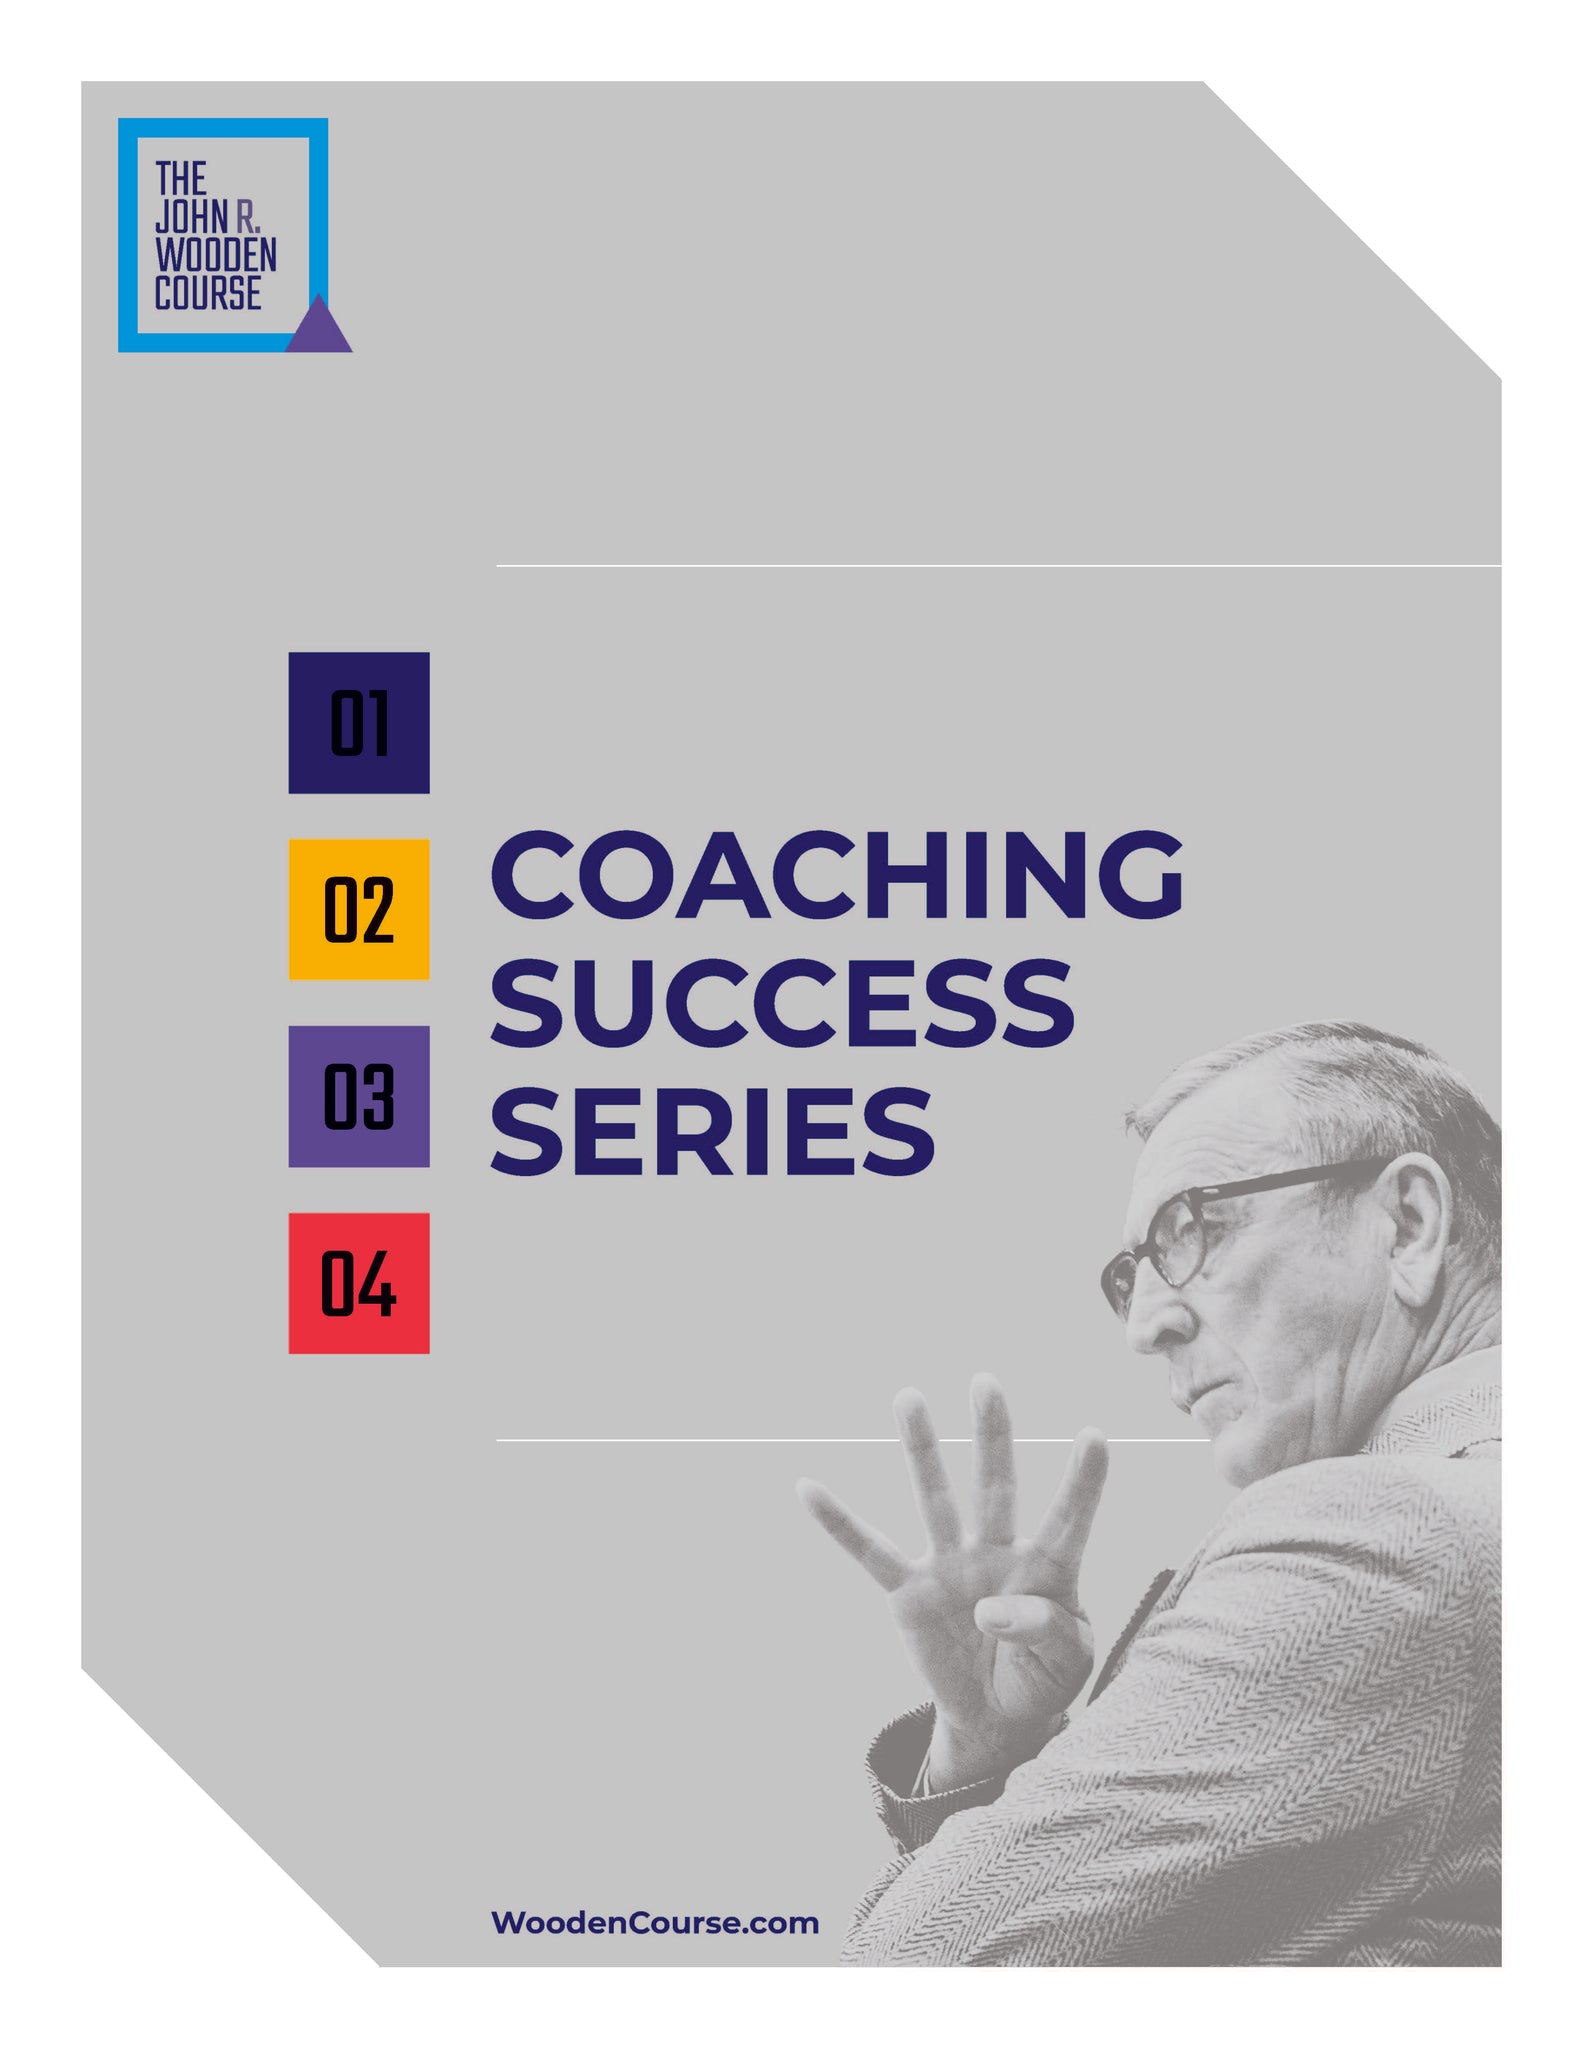 John Wooden's Coaching Course - Self Study Complete Set